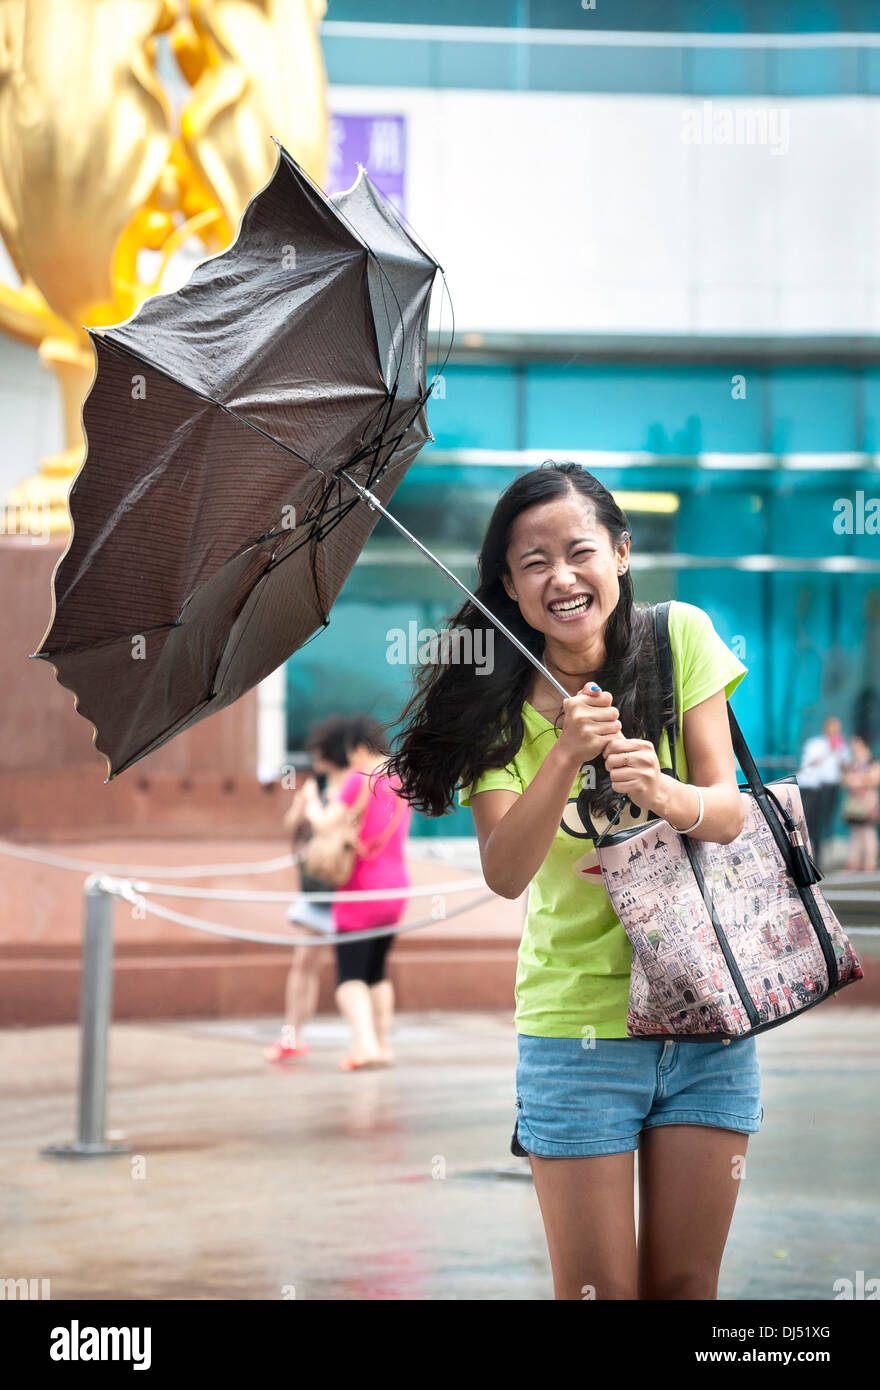 Laughing girl has her umbrella turned inside-out during a typhoon in Hong Kong Stock Photo